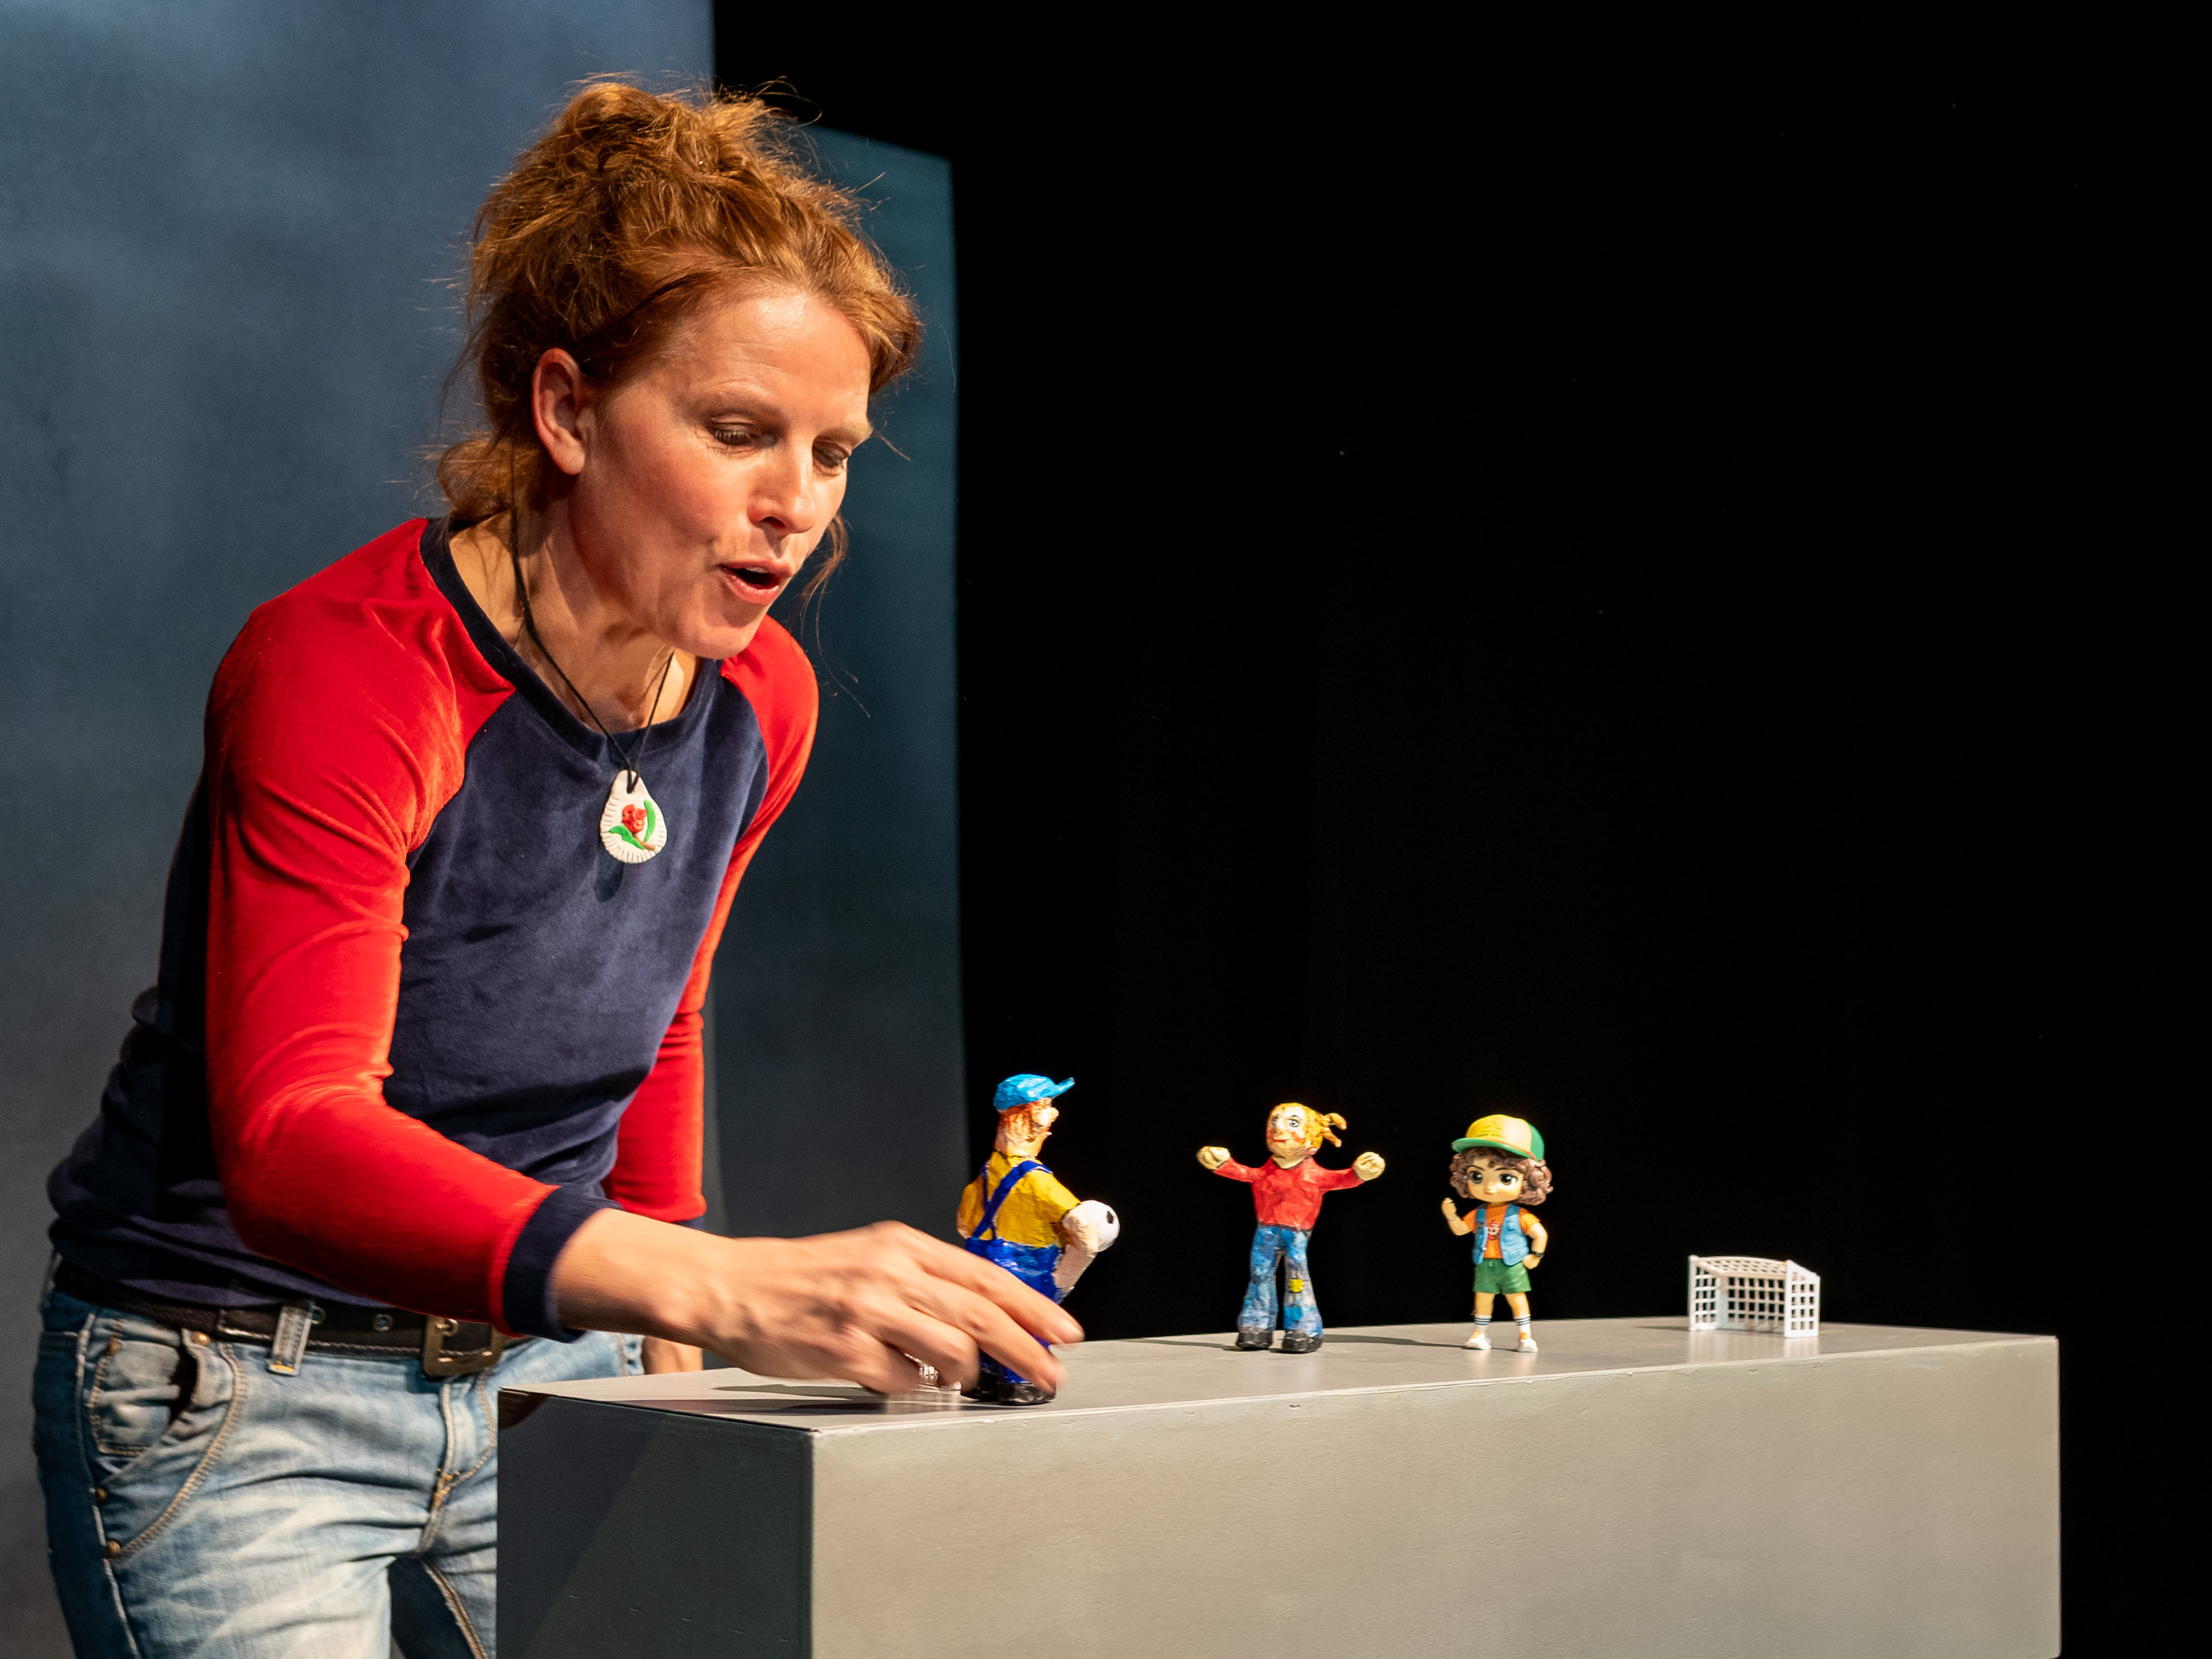 Puppeteer Annegret Geist is holding the figure of a boy in blue dungarees and a blue cap. In front of the figure of the boy is the figure of a little girl with red hair, next to her is the figure of another girl with brown hair and a green cap.